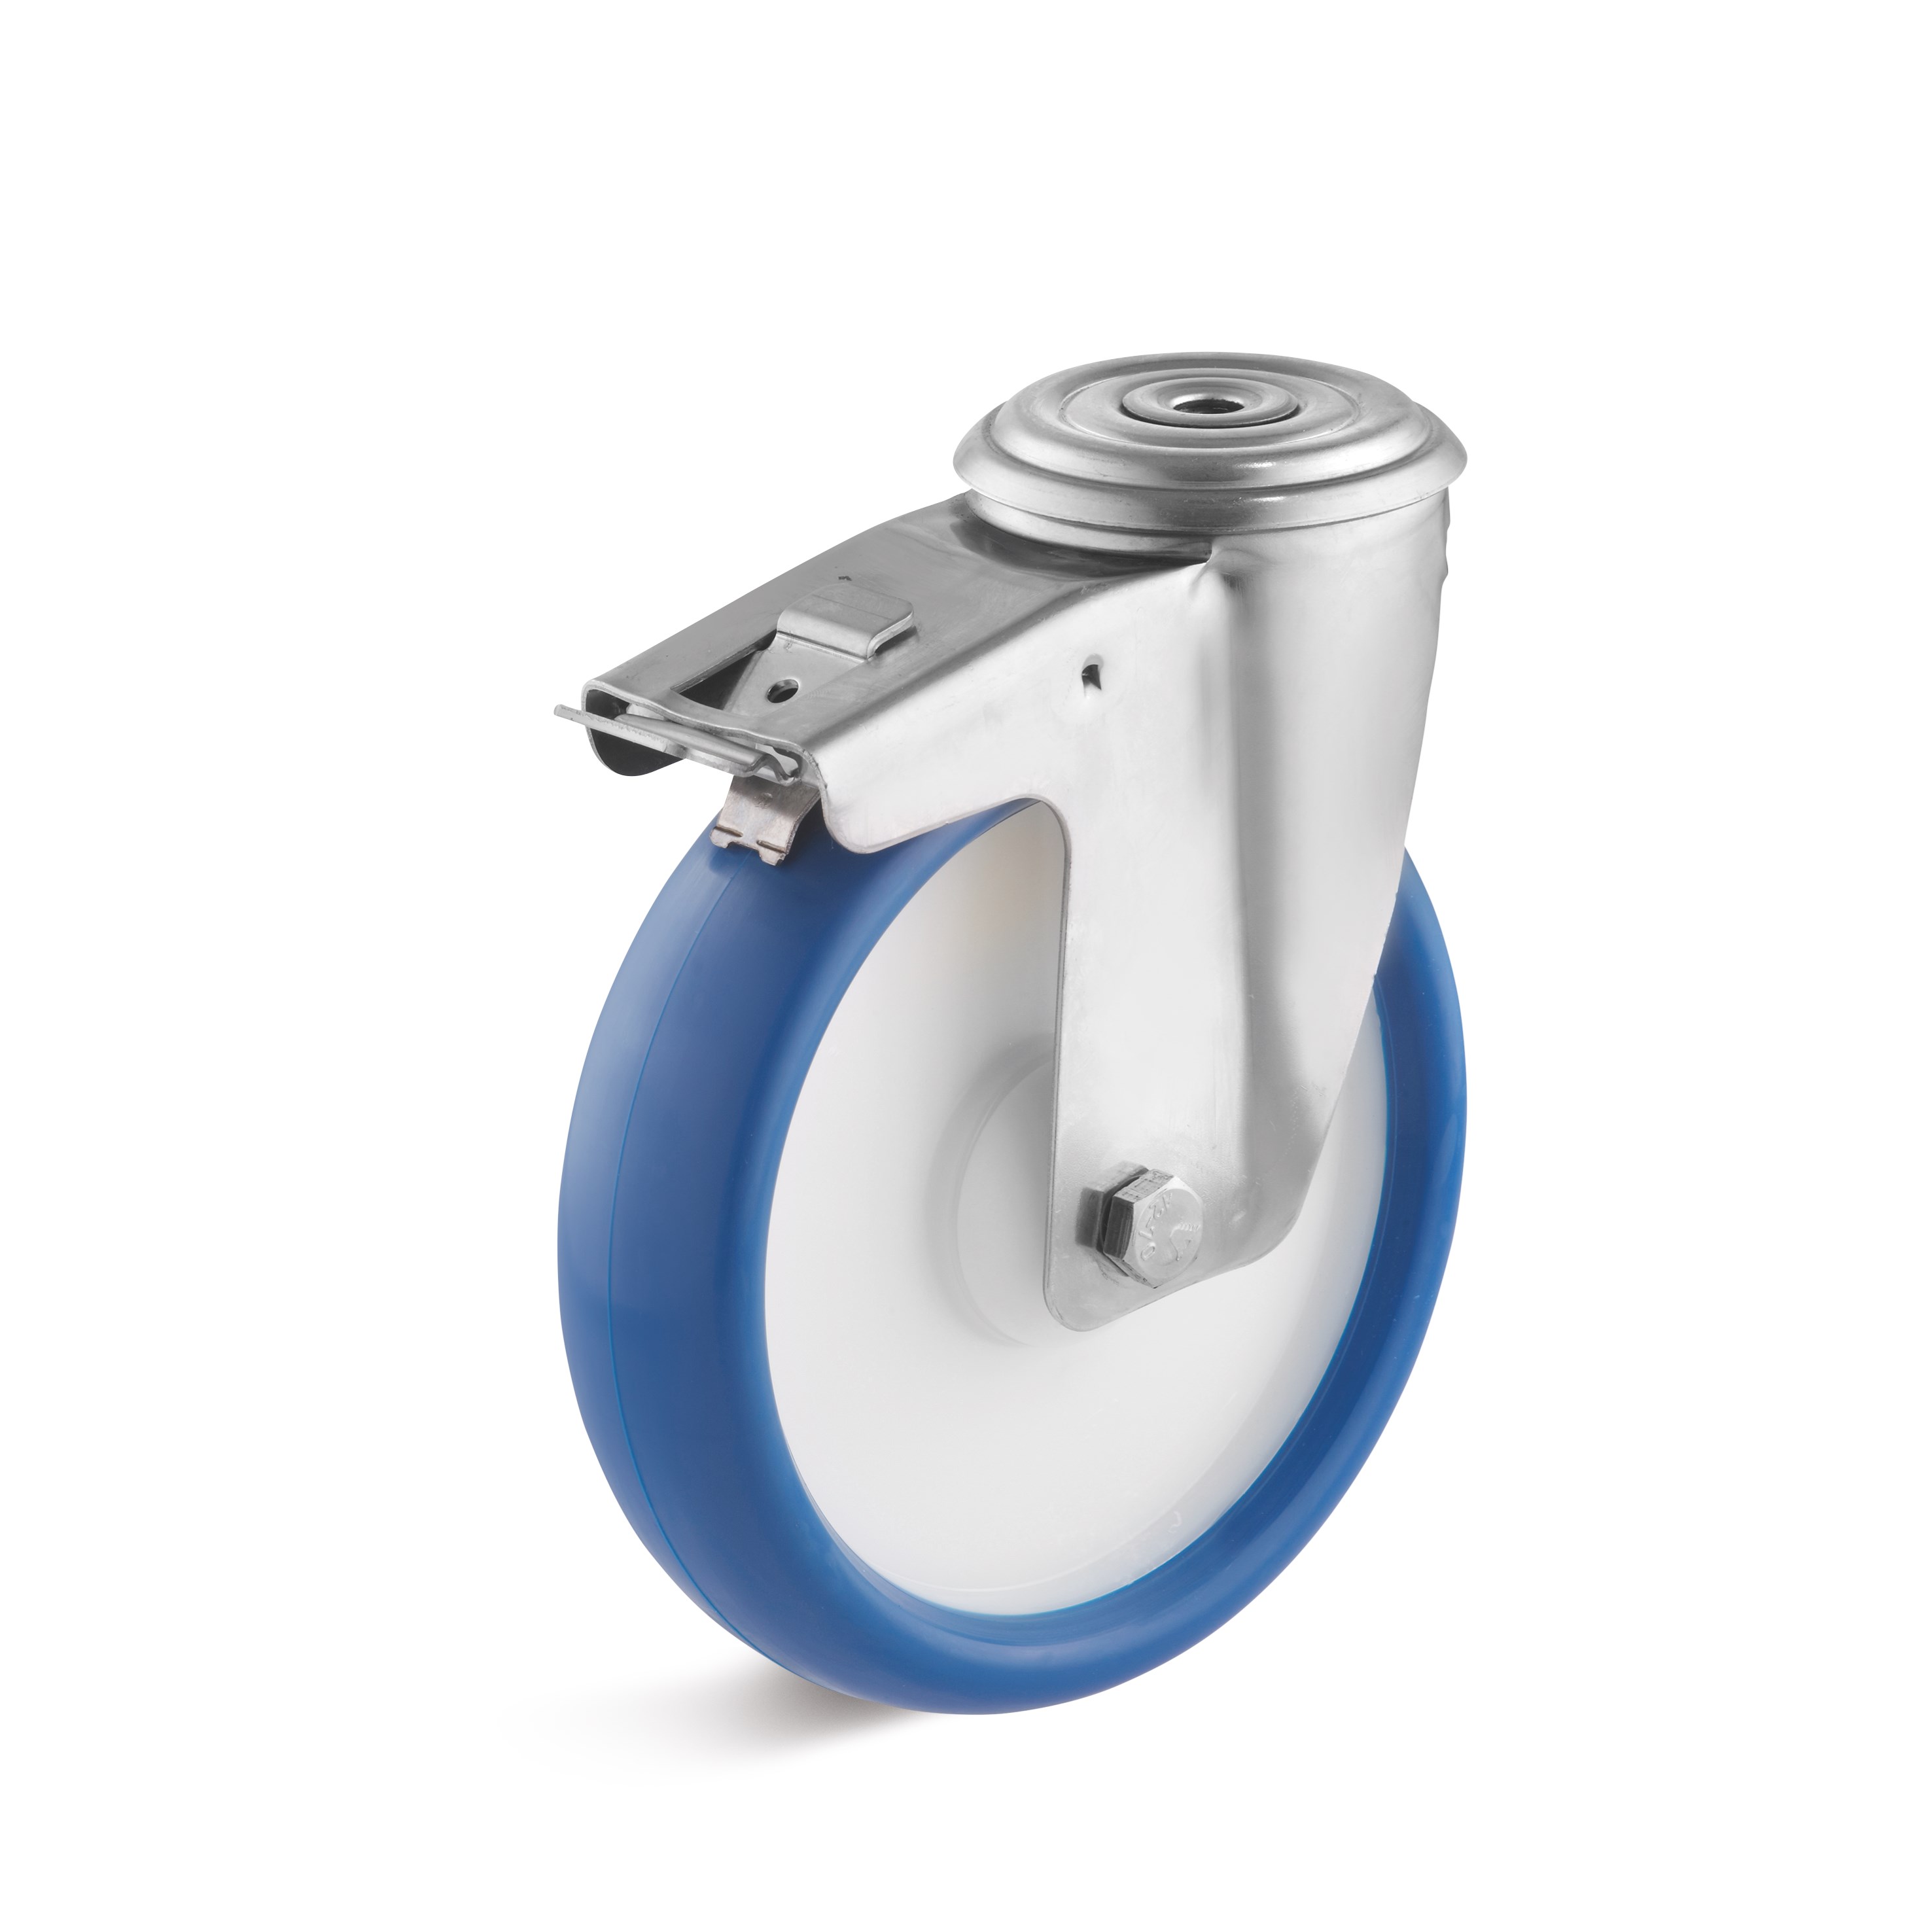 Stainless steel swivel castor with back hole attachment and double stop, polyurethane wheel